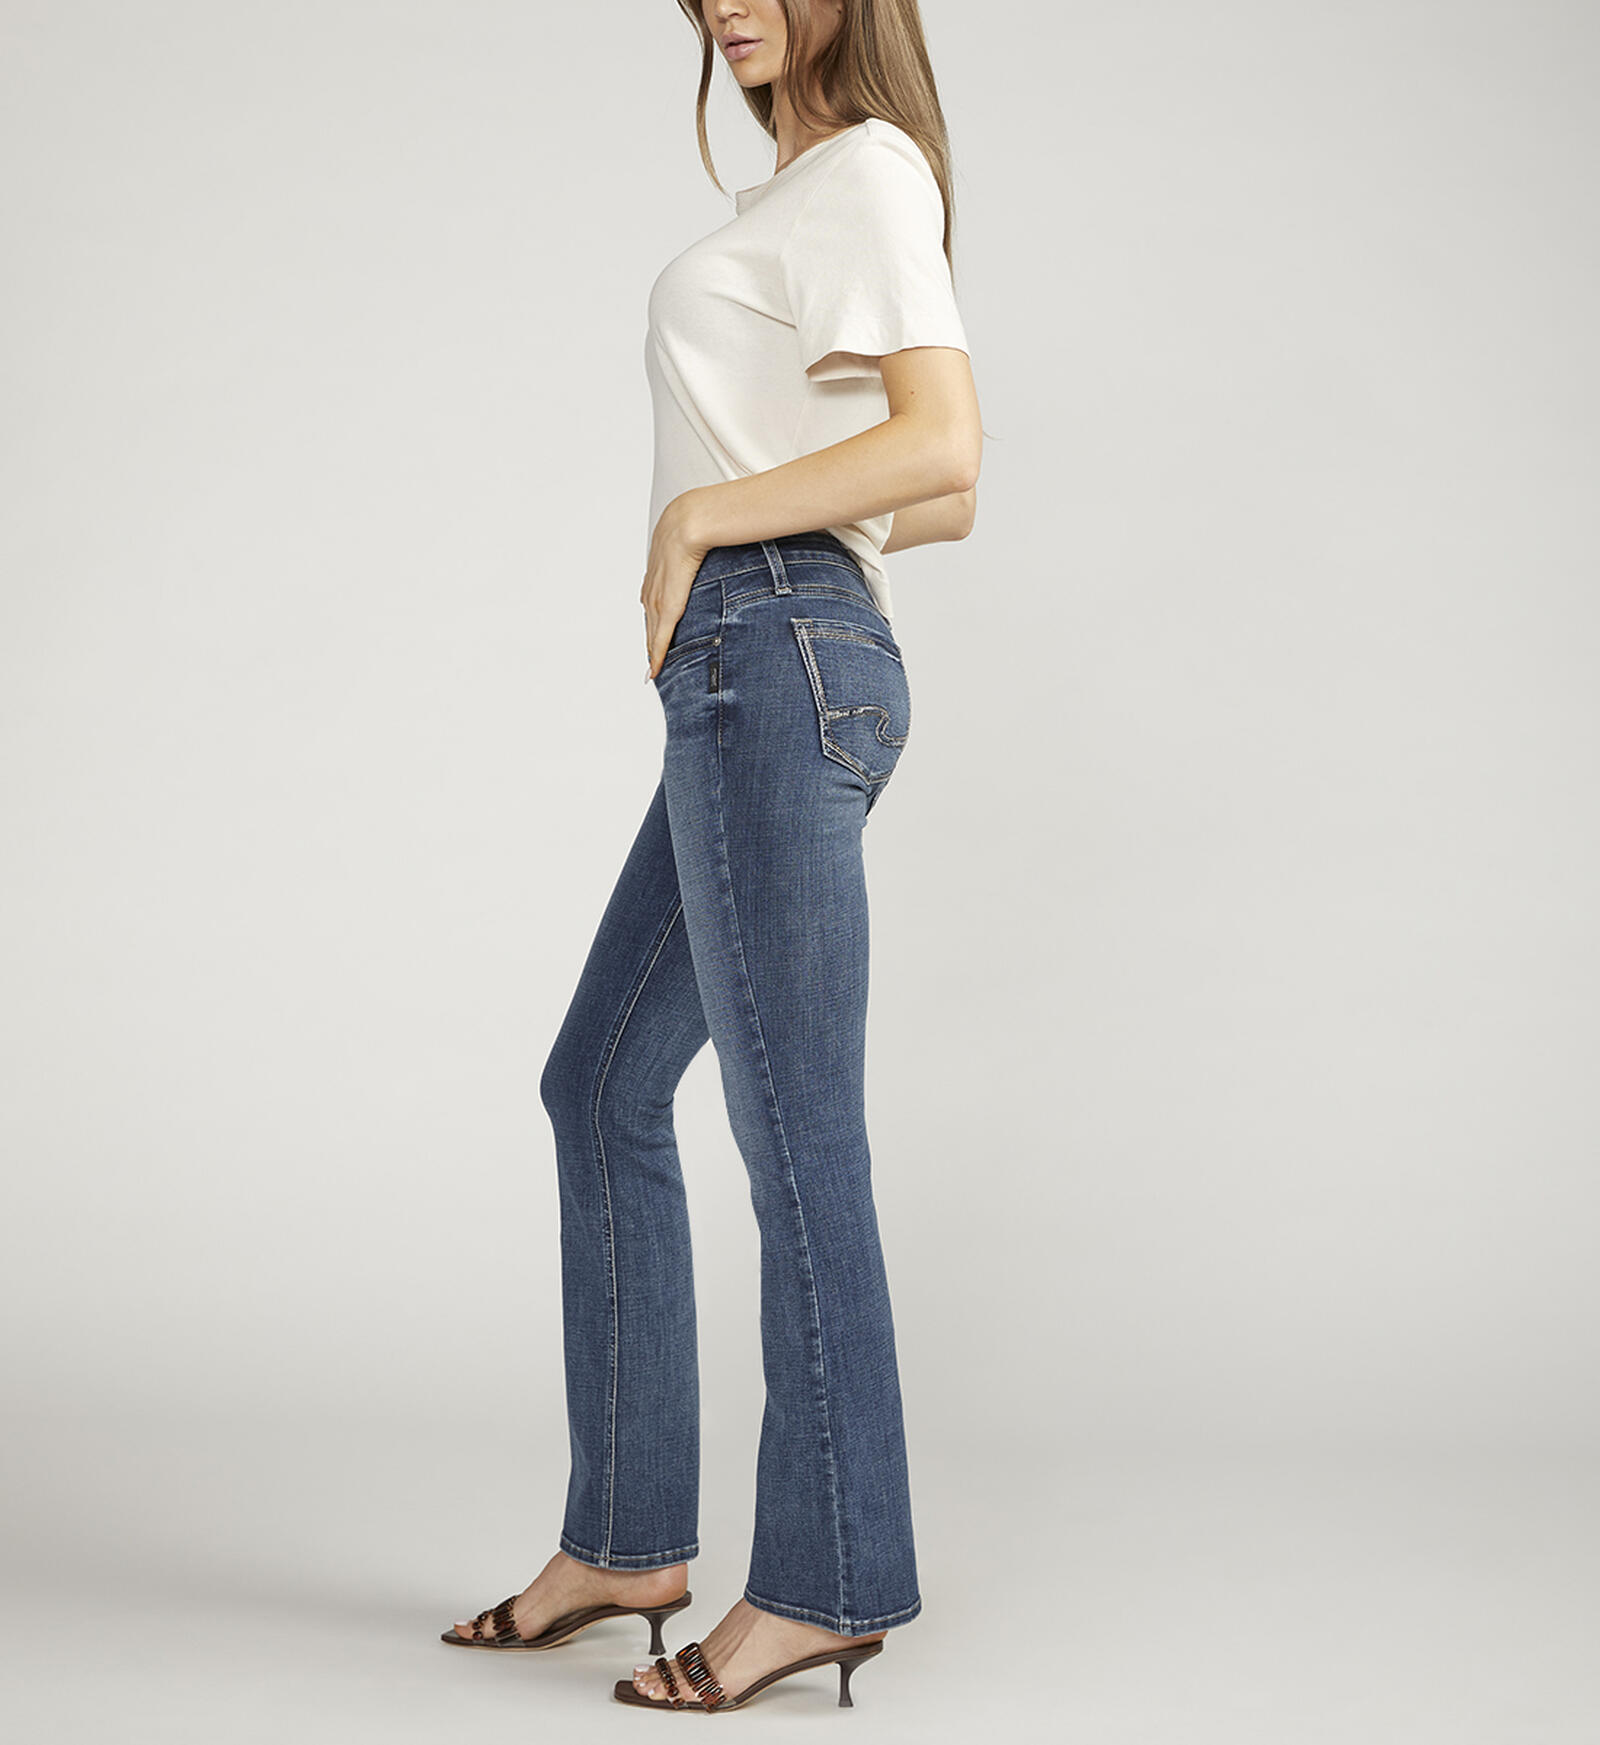 Buy Tuesday Low Rise Slim Bootcut Jeans for CAD 118.00